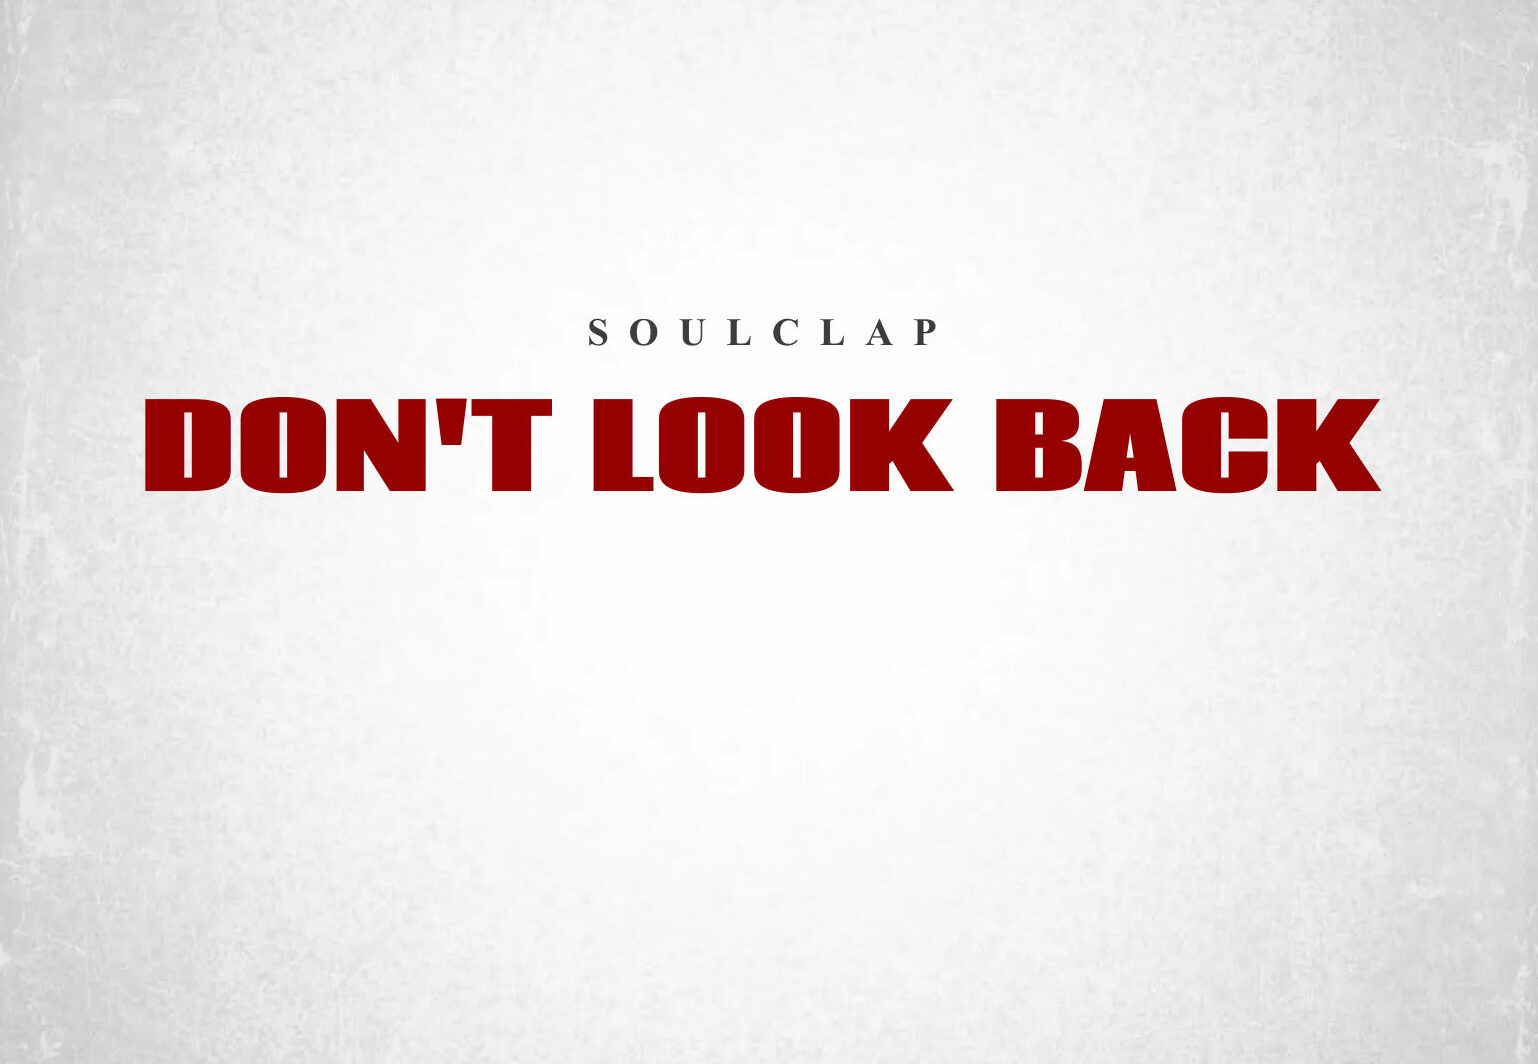 SoulClap’s “Don't Look Back” A Lo-Fi Masterpiece